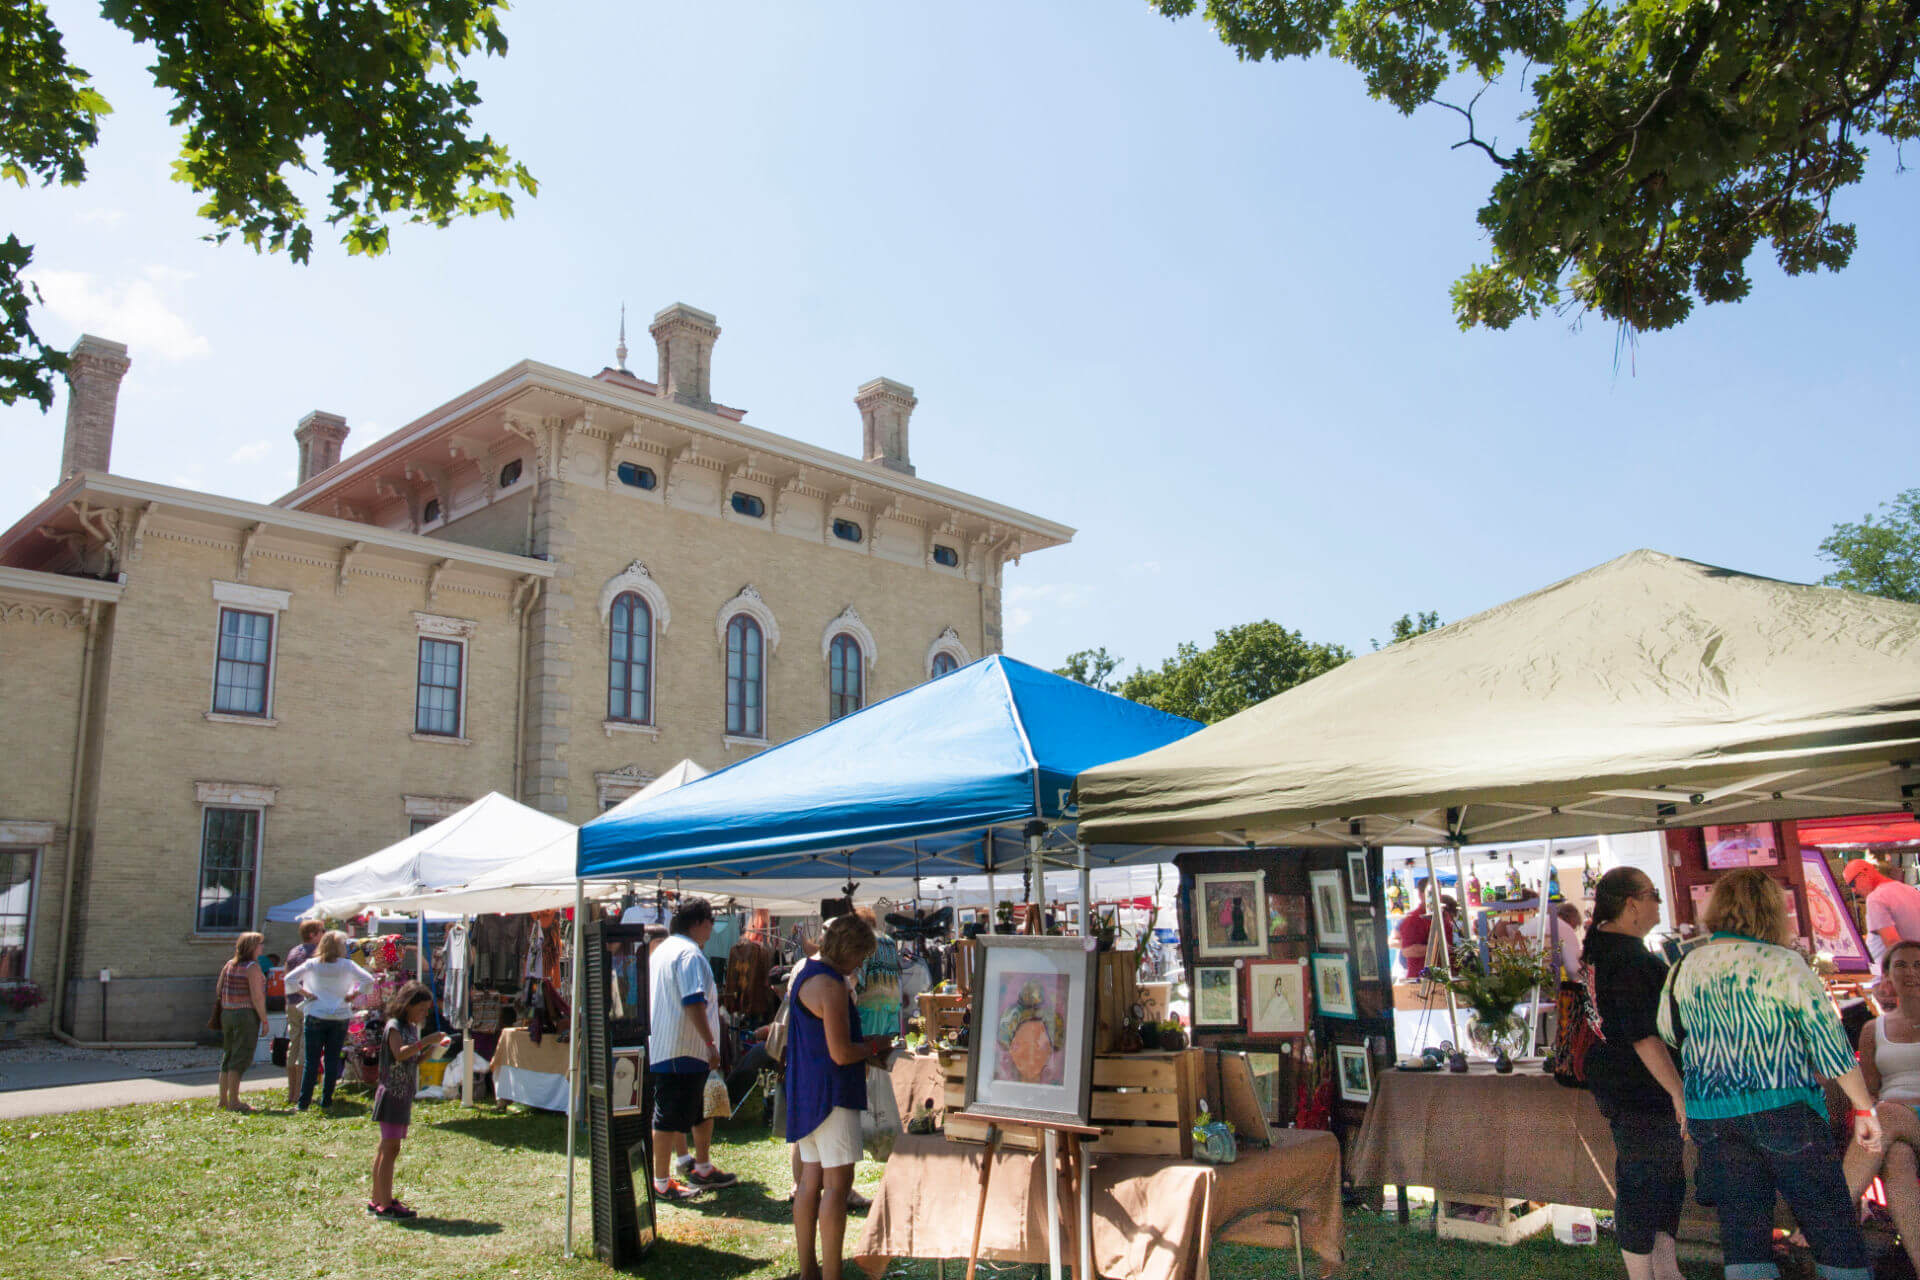 Patrons of the Tallman Arts Festival browse artists' works underneath tents, with the Lincoln-Tallman House in the background